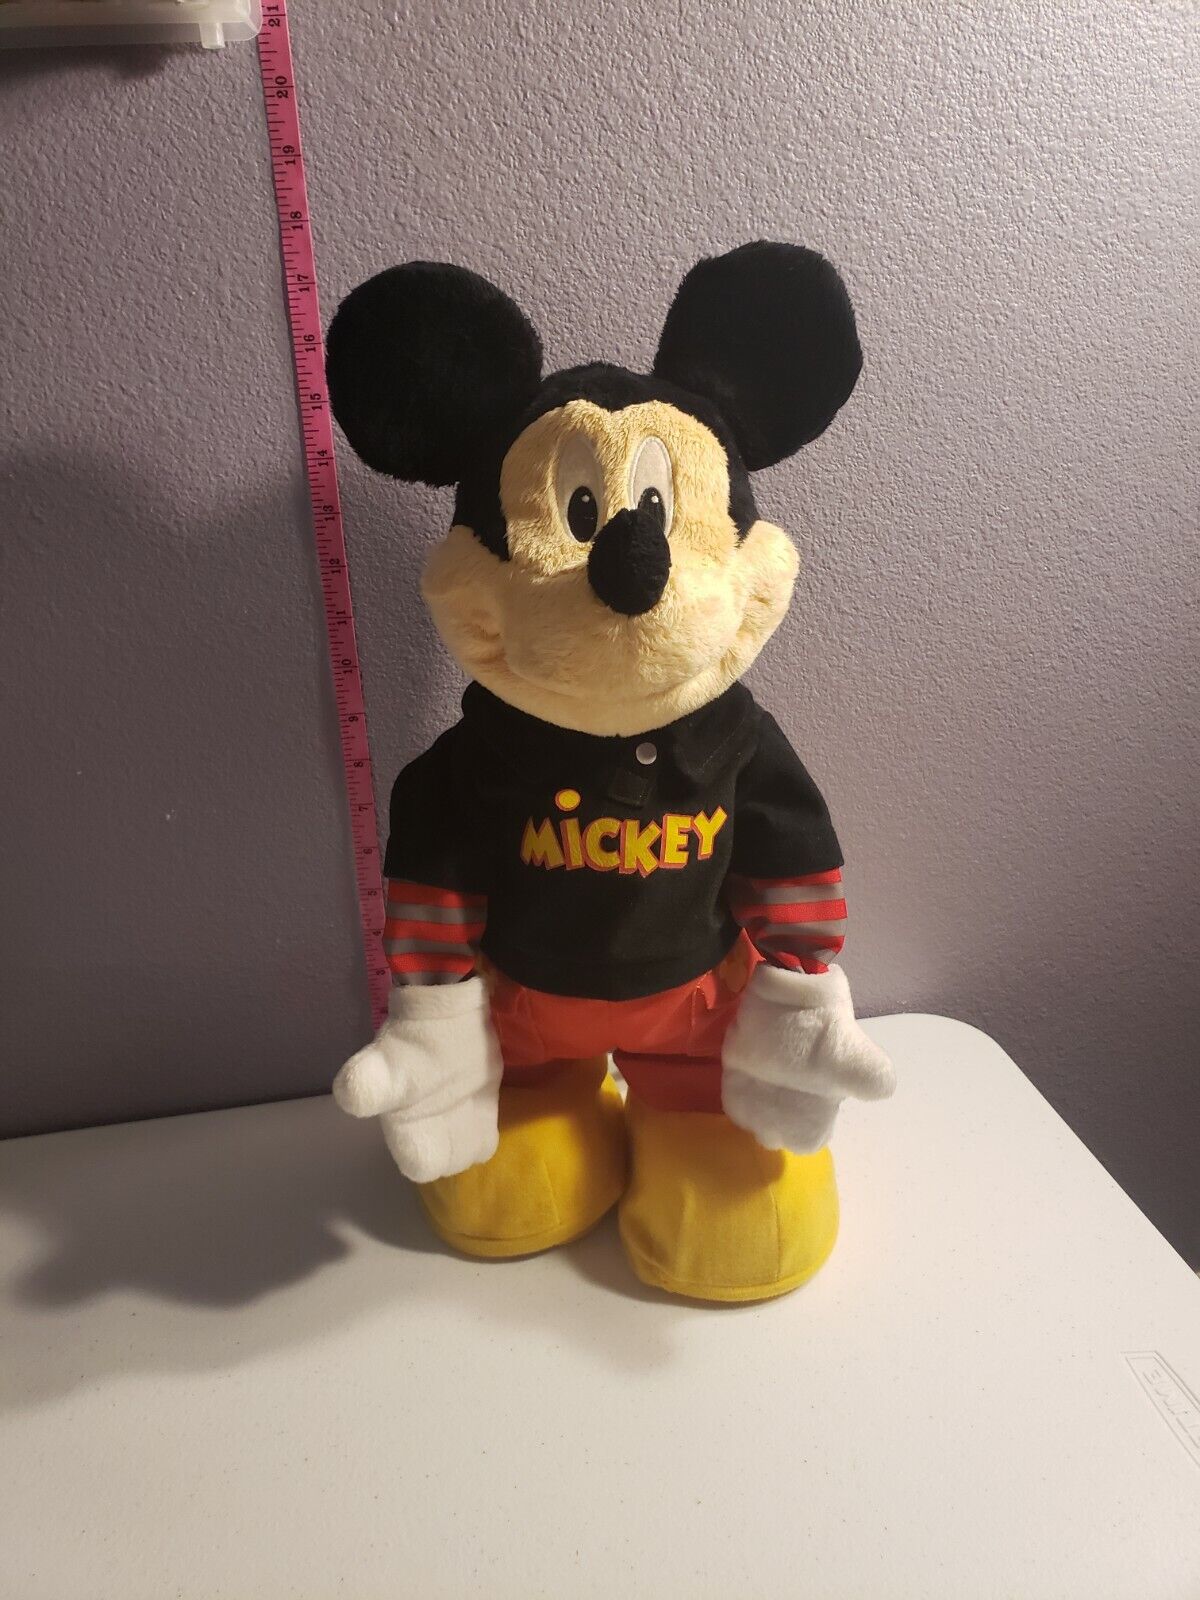 Max 61% OFF Vintage Mattel Max 48% OFF Dance Star Mickey Animated Interactive Mouse Elec